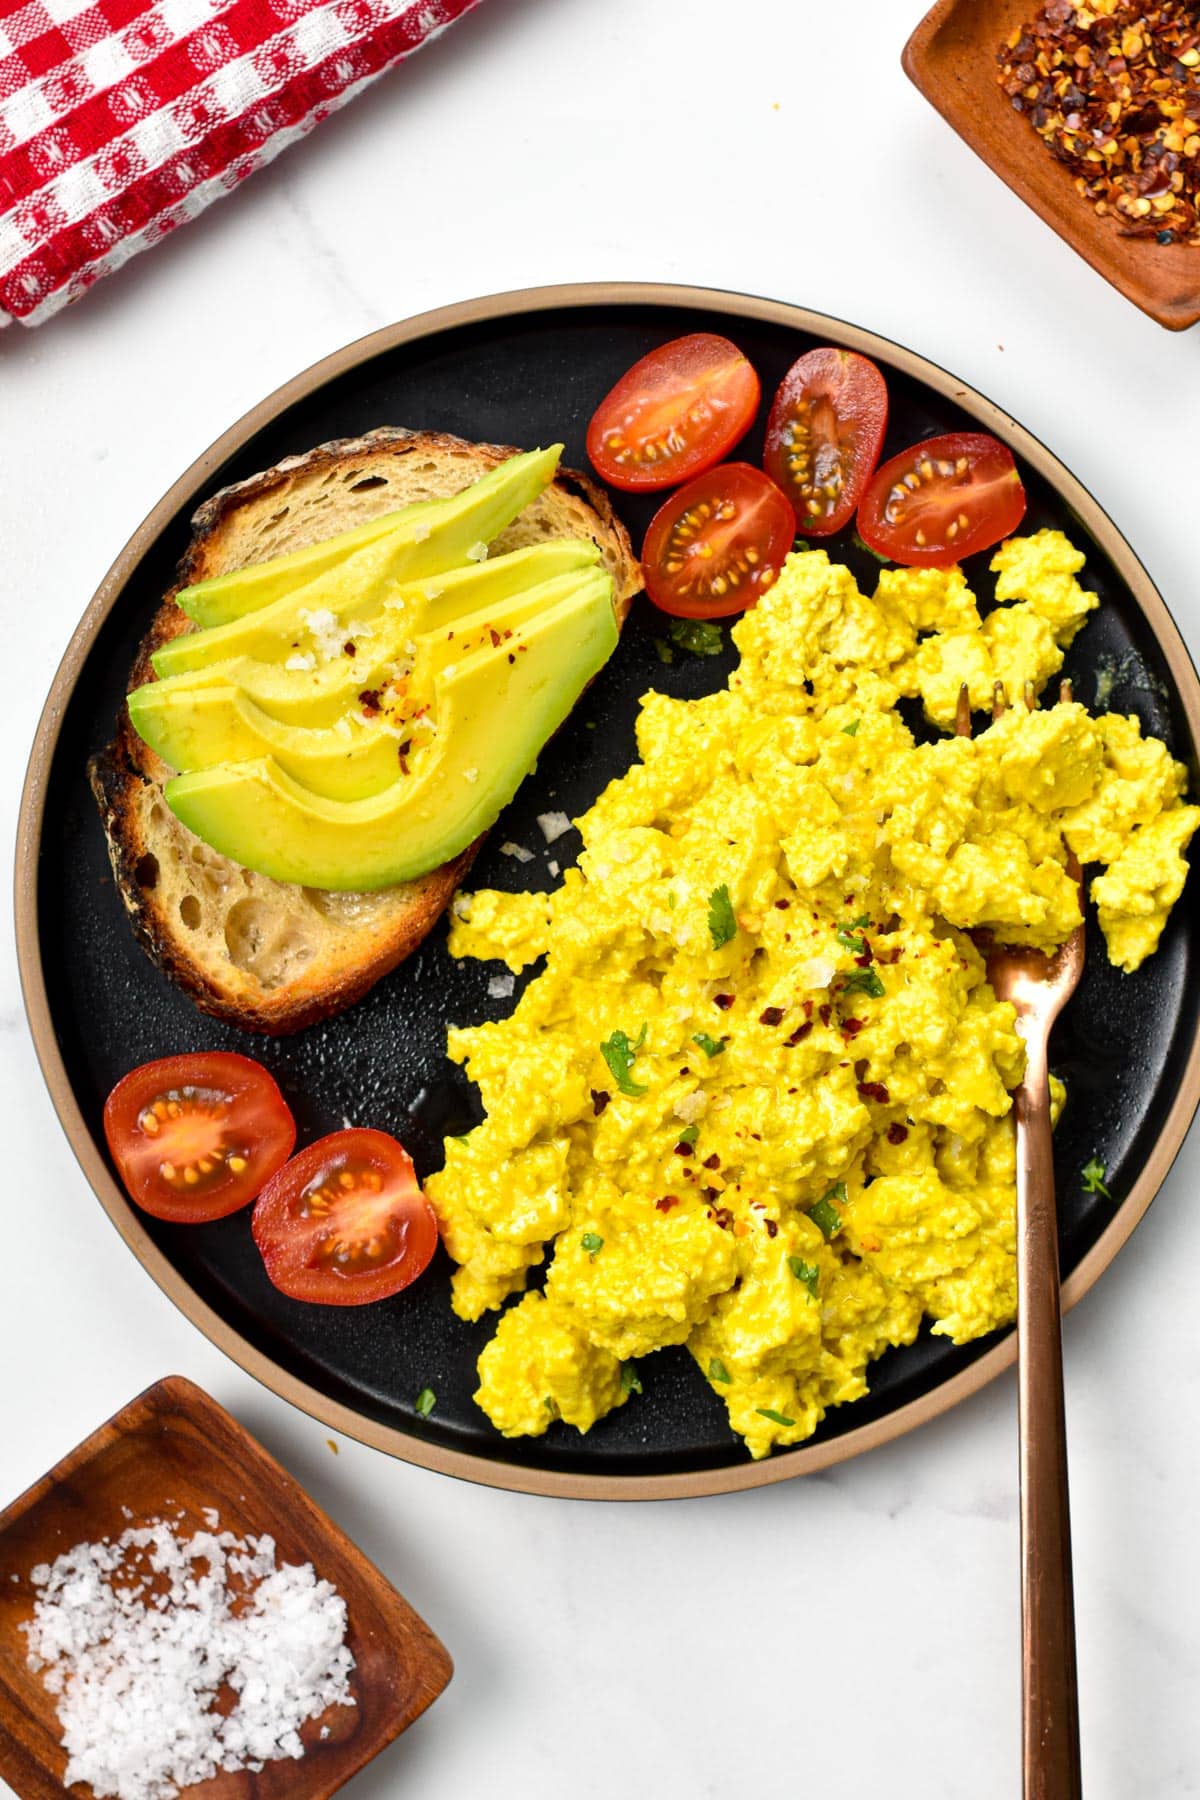 This Tofu Scramble recipe is an egg-free scramble made out tofu with such a delicious cheesy, eggy flavor that nobody will guess it's eggless.